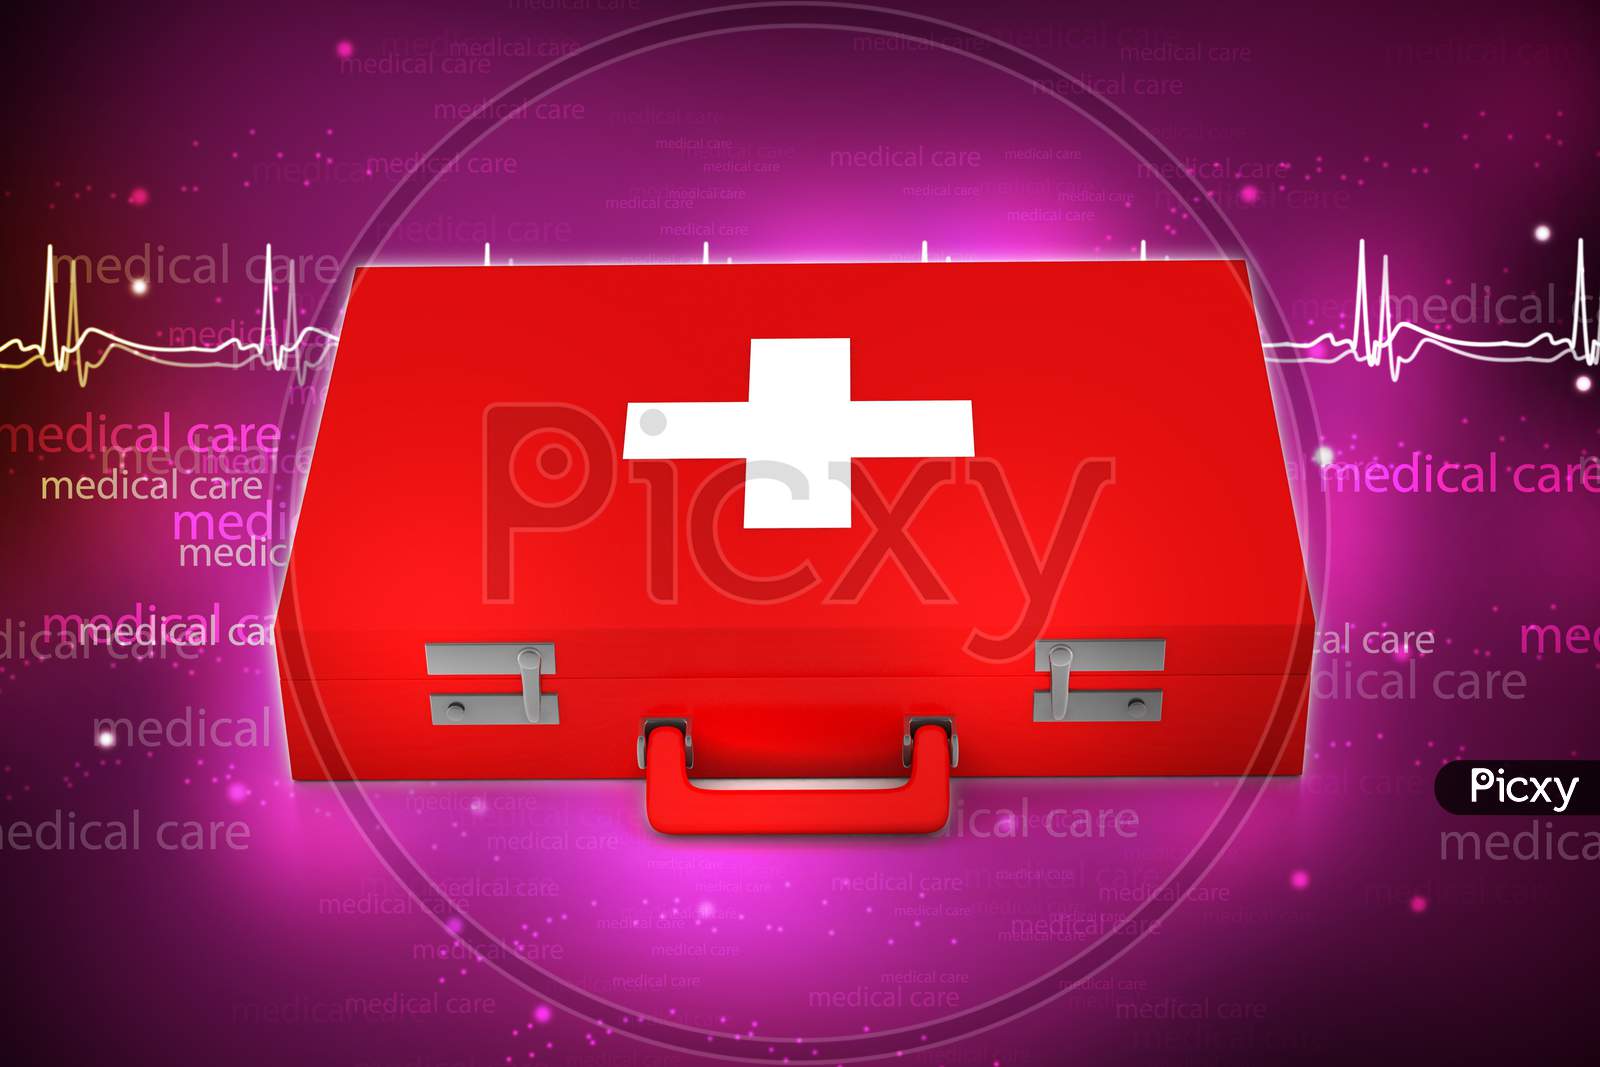 First Aid Kit. 3D